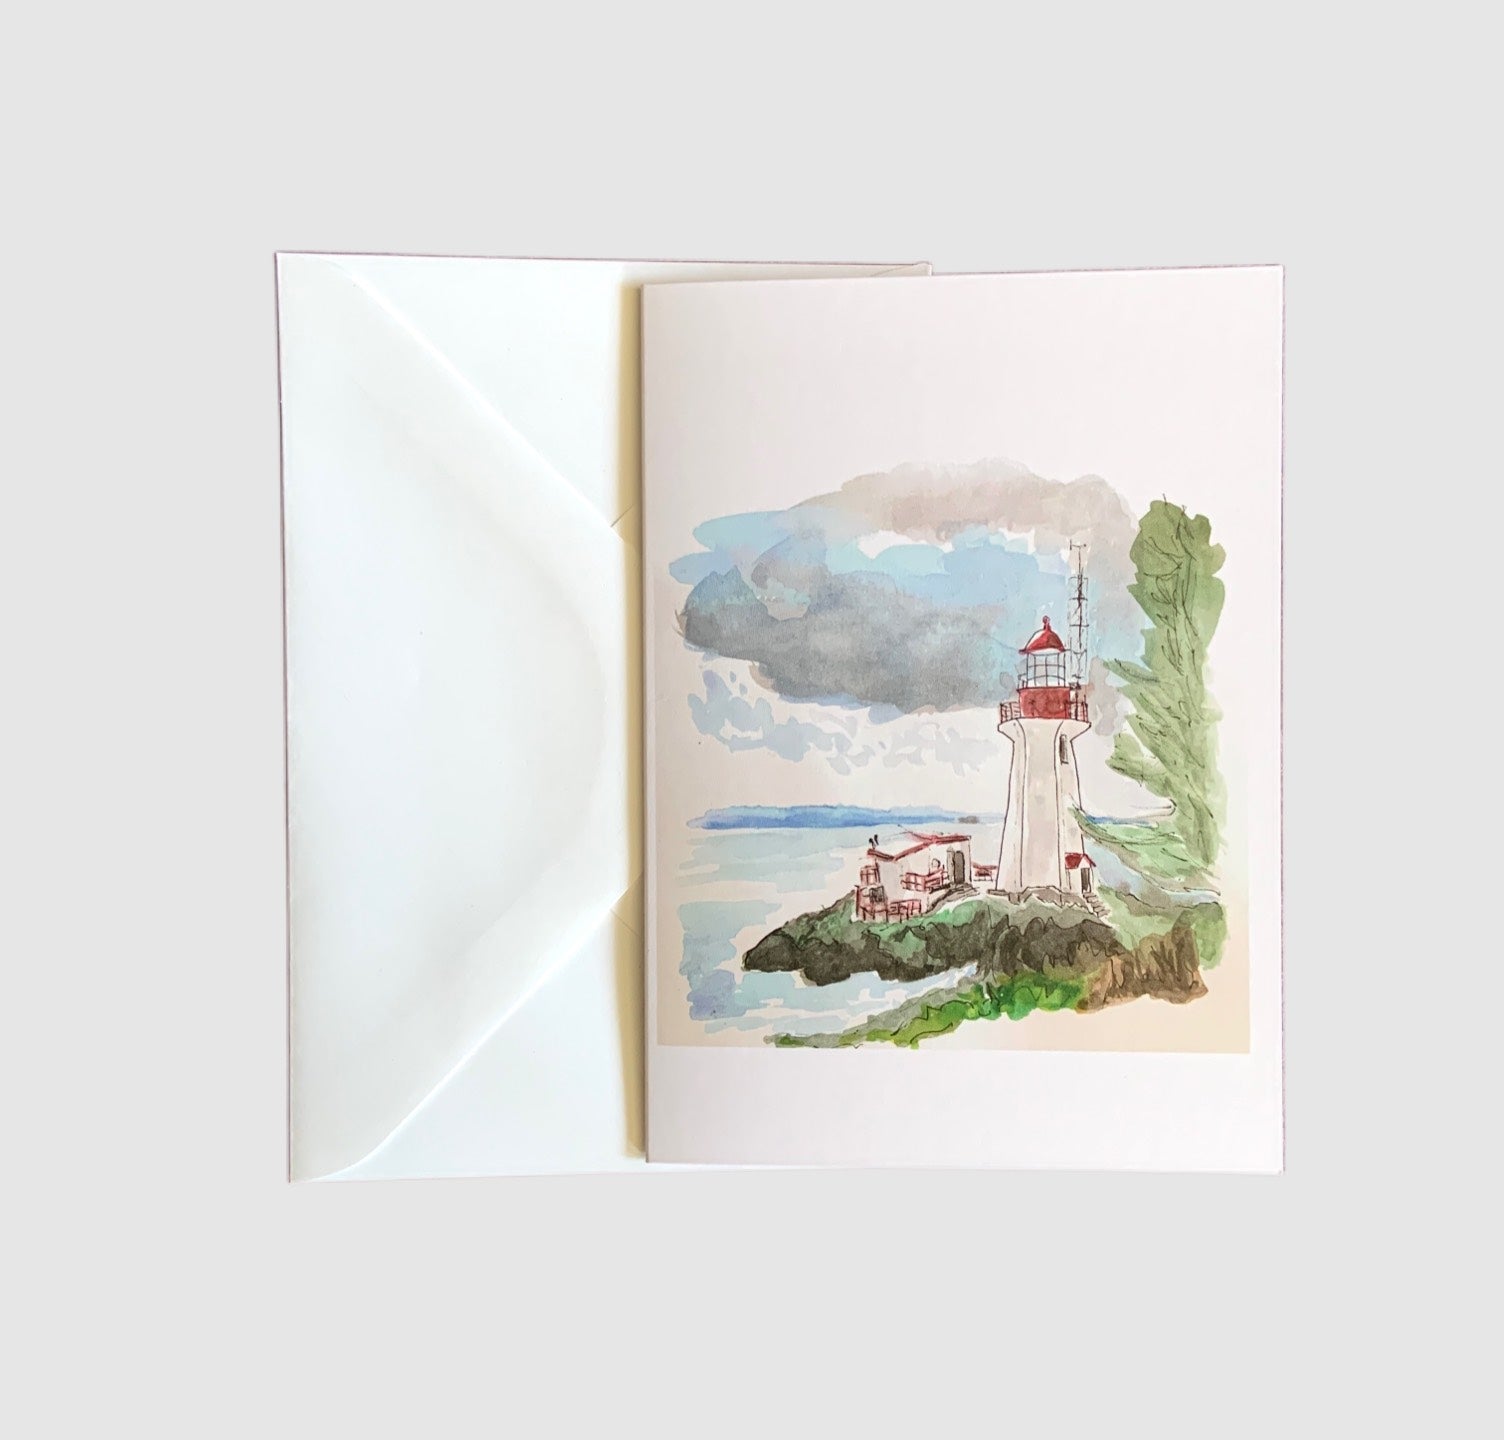 A sketch of the Sheringham Lighthouse painted with watercolors on the front of a greeting card.